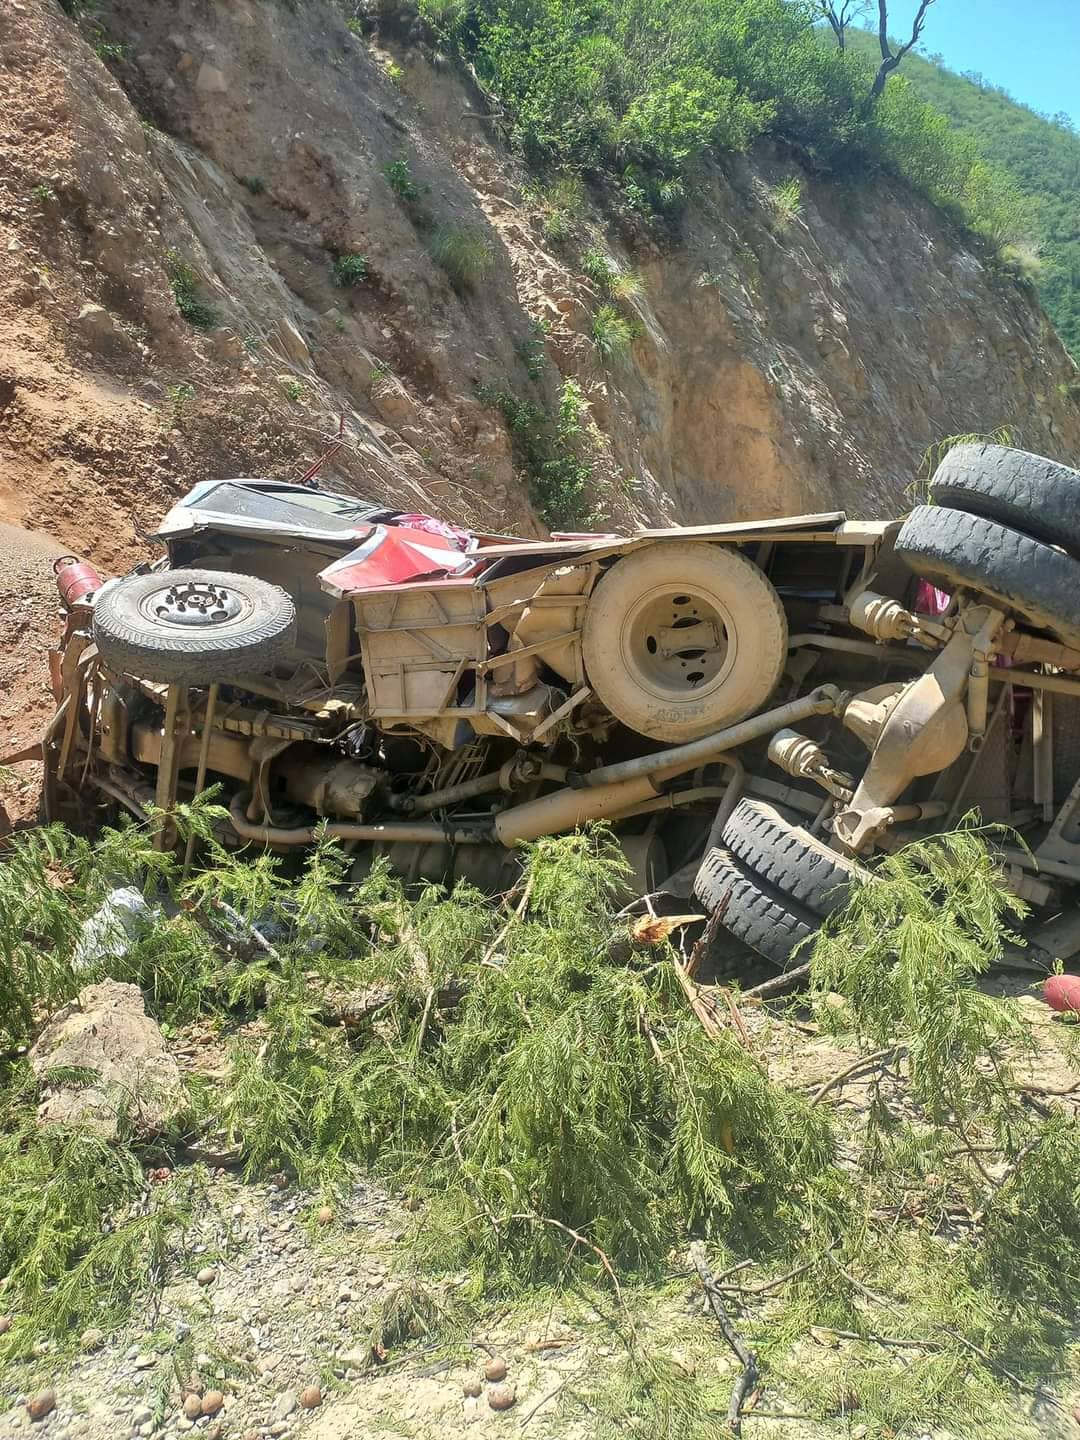 Death toll of Ramechhap bus accident climbs to 13